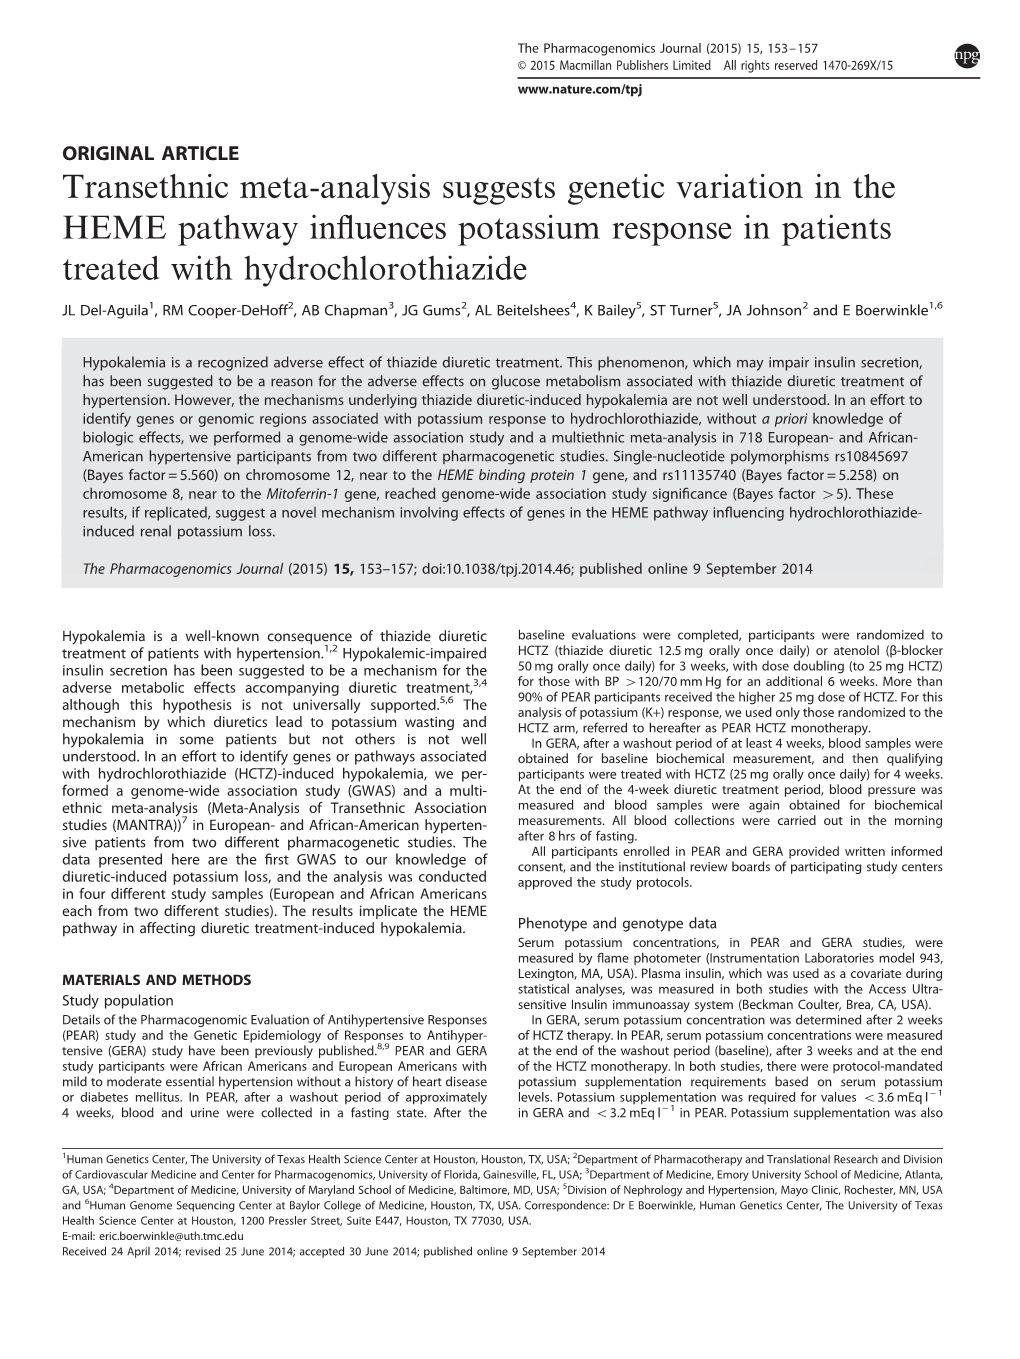 Transethnic Meta-Analysis Suggests Genetic Variation in the HEME Pathway Inﬂuences Potassium Response in Patients Treated with Hydrochlorothiazide